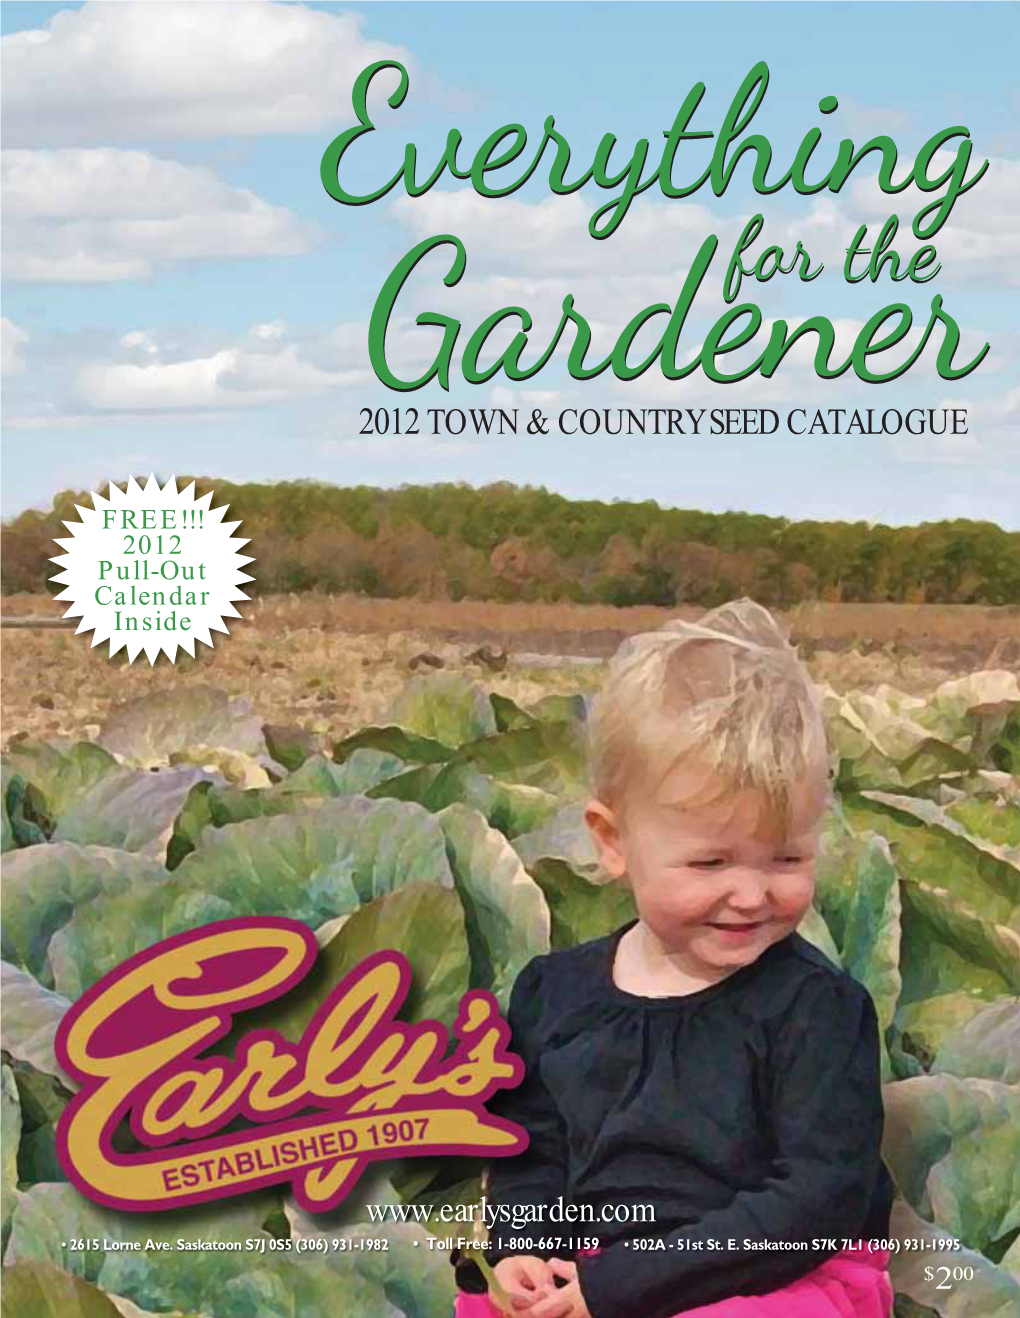 Everything for the Gardener 2012 TOWN & COUNTRY SEED CATALOGUE